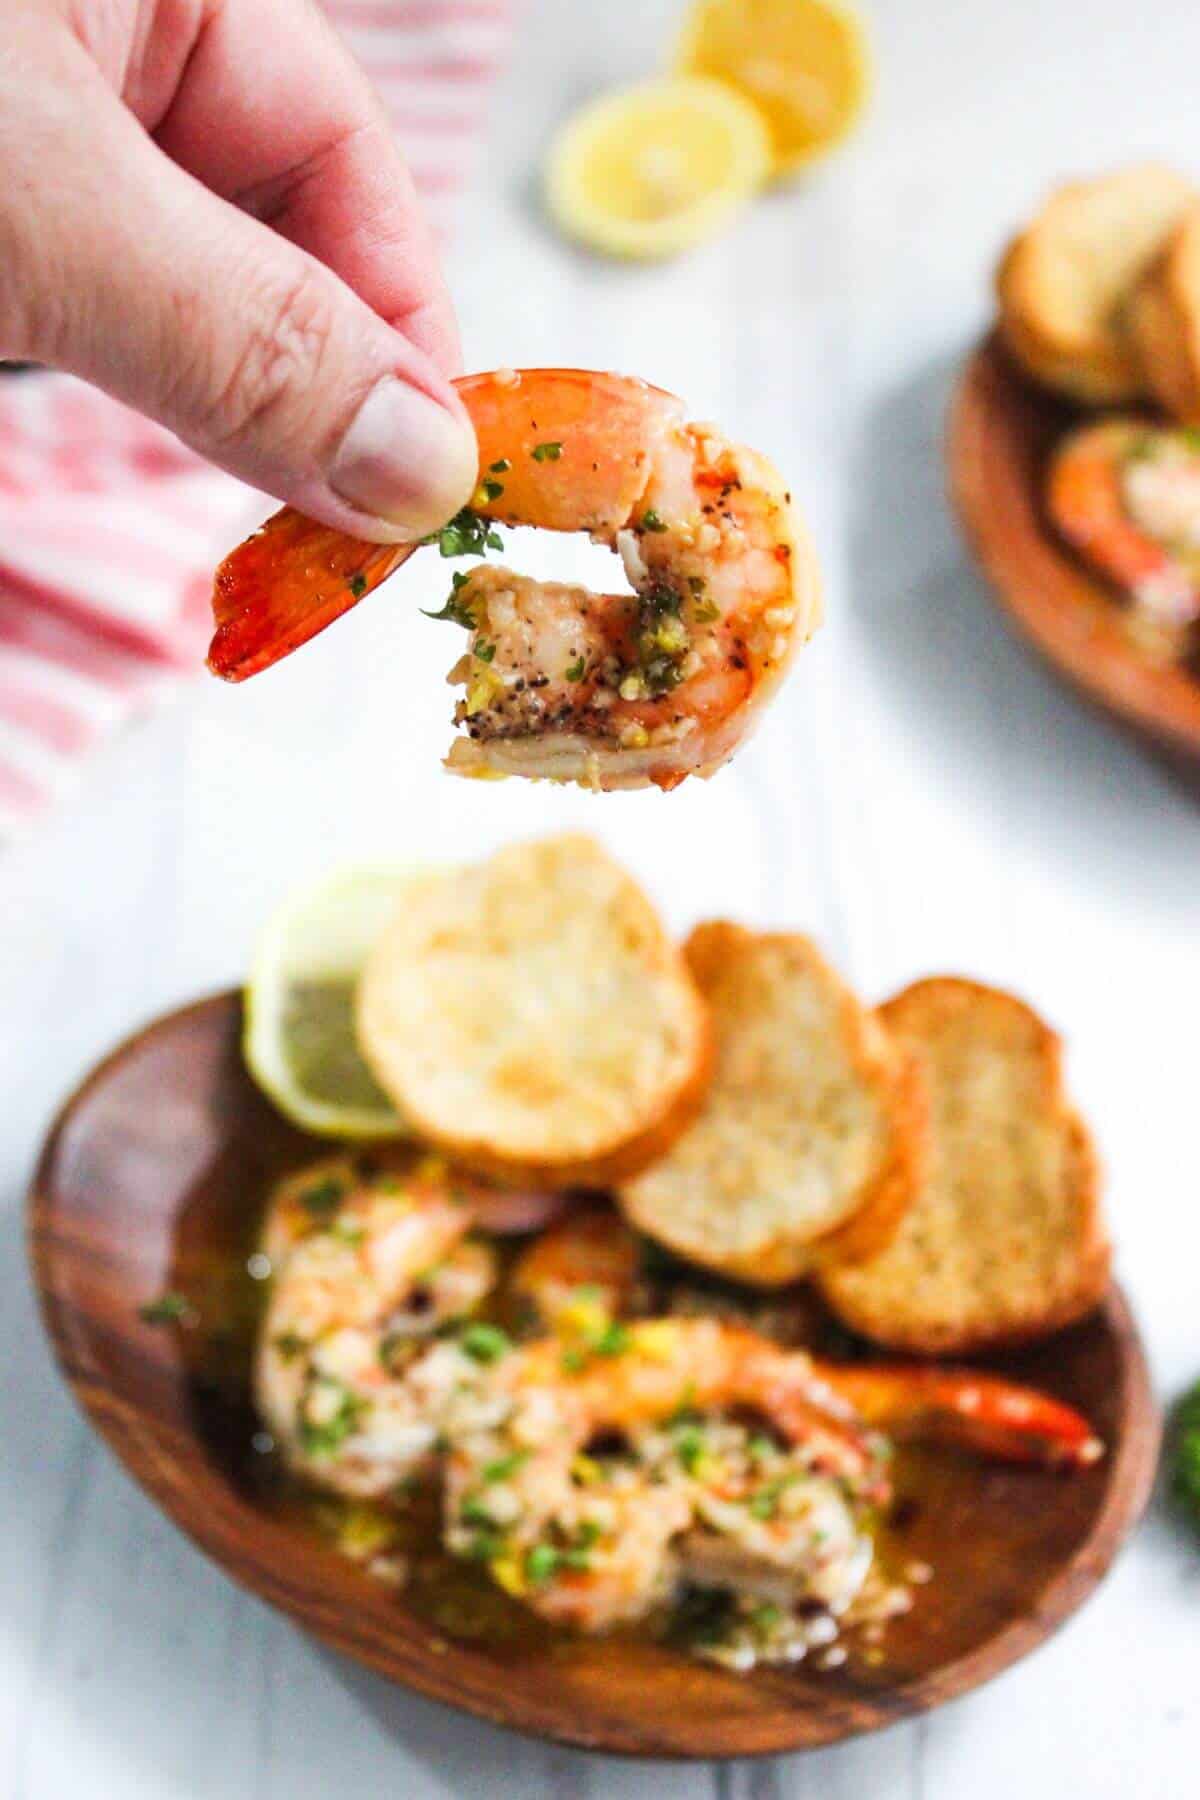 A person is grabbing a shrimp from a plate.